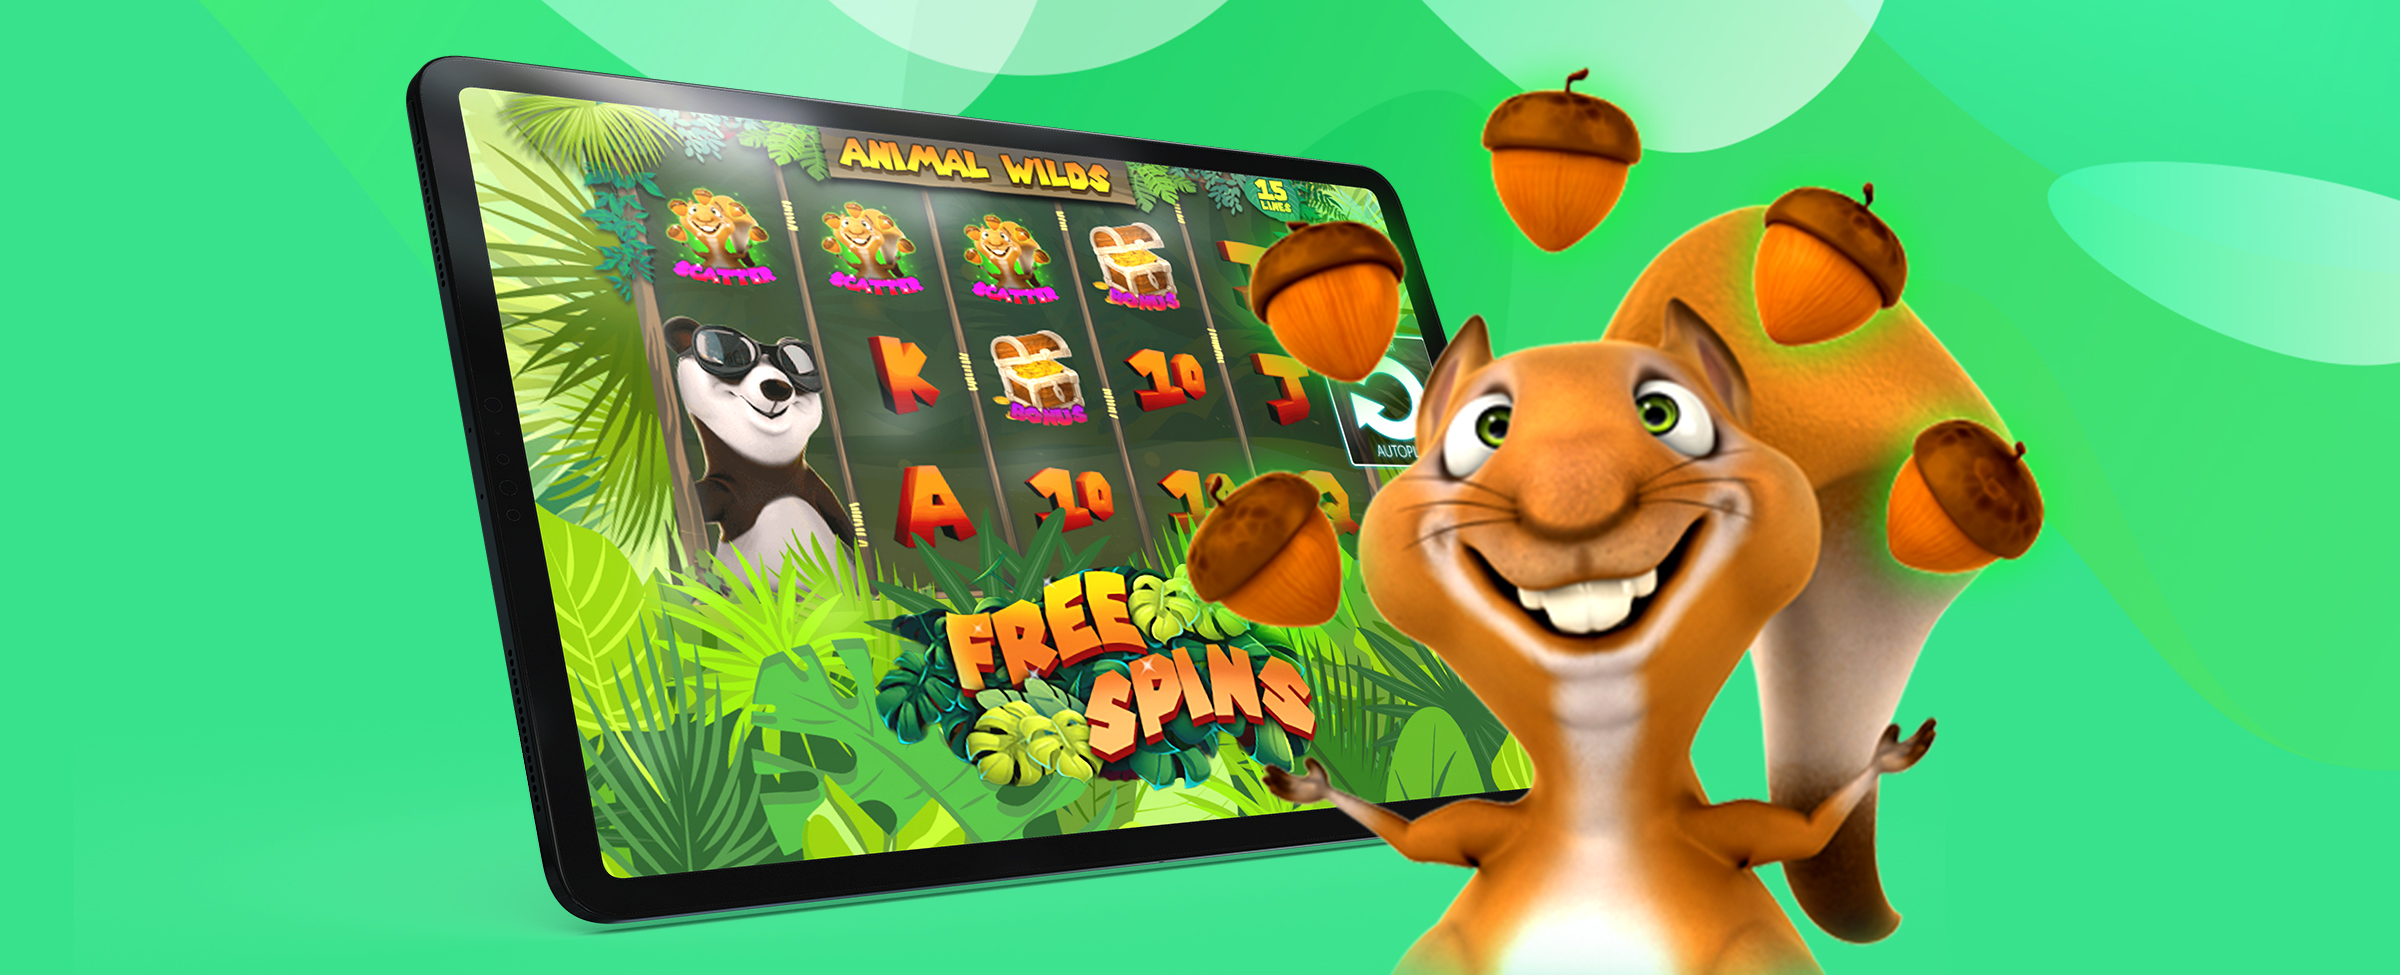 A cartoon squirrel juggling acorns standing in front of a screen showing the game features of the Animal Wilds slot game at SlotsLV